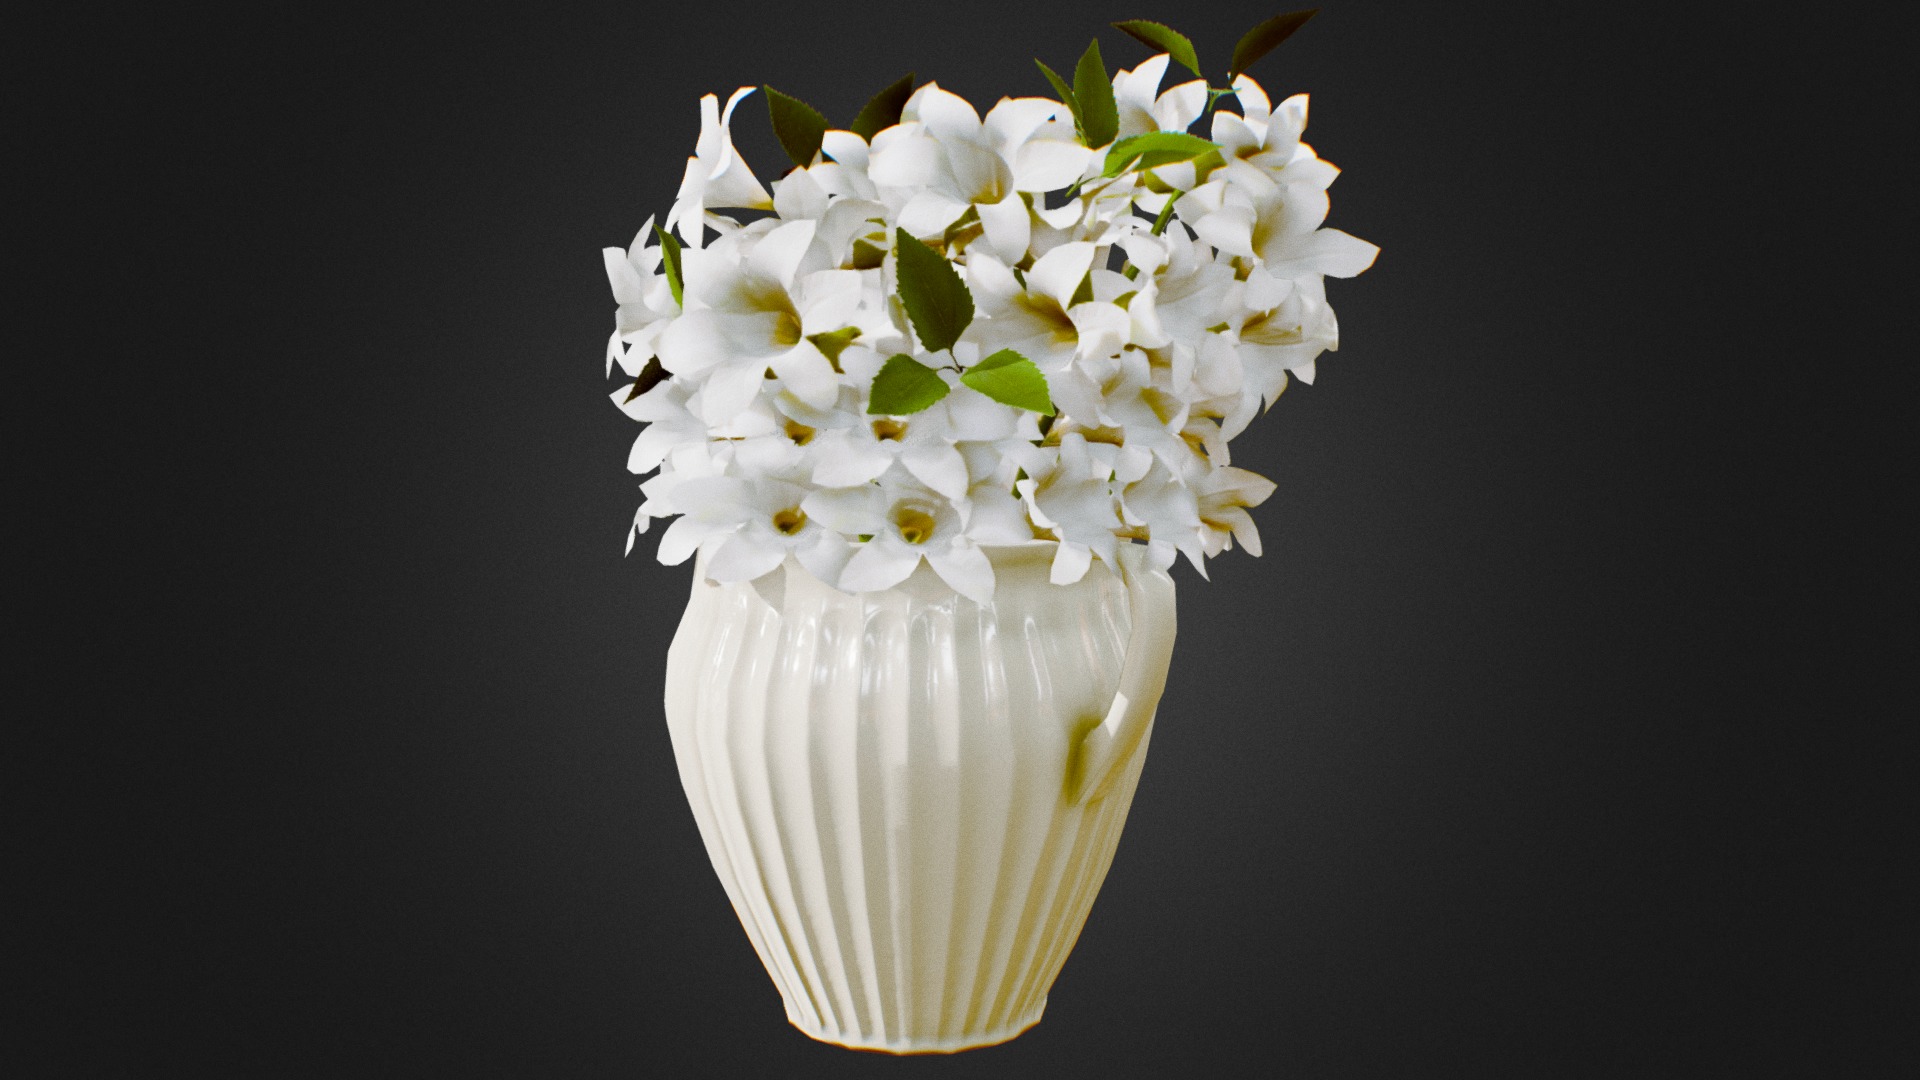 3D model low poly flower pot - This is a 3D model of the low poly flower pot. The 3D model is about a vase with white flowers.